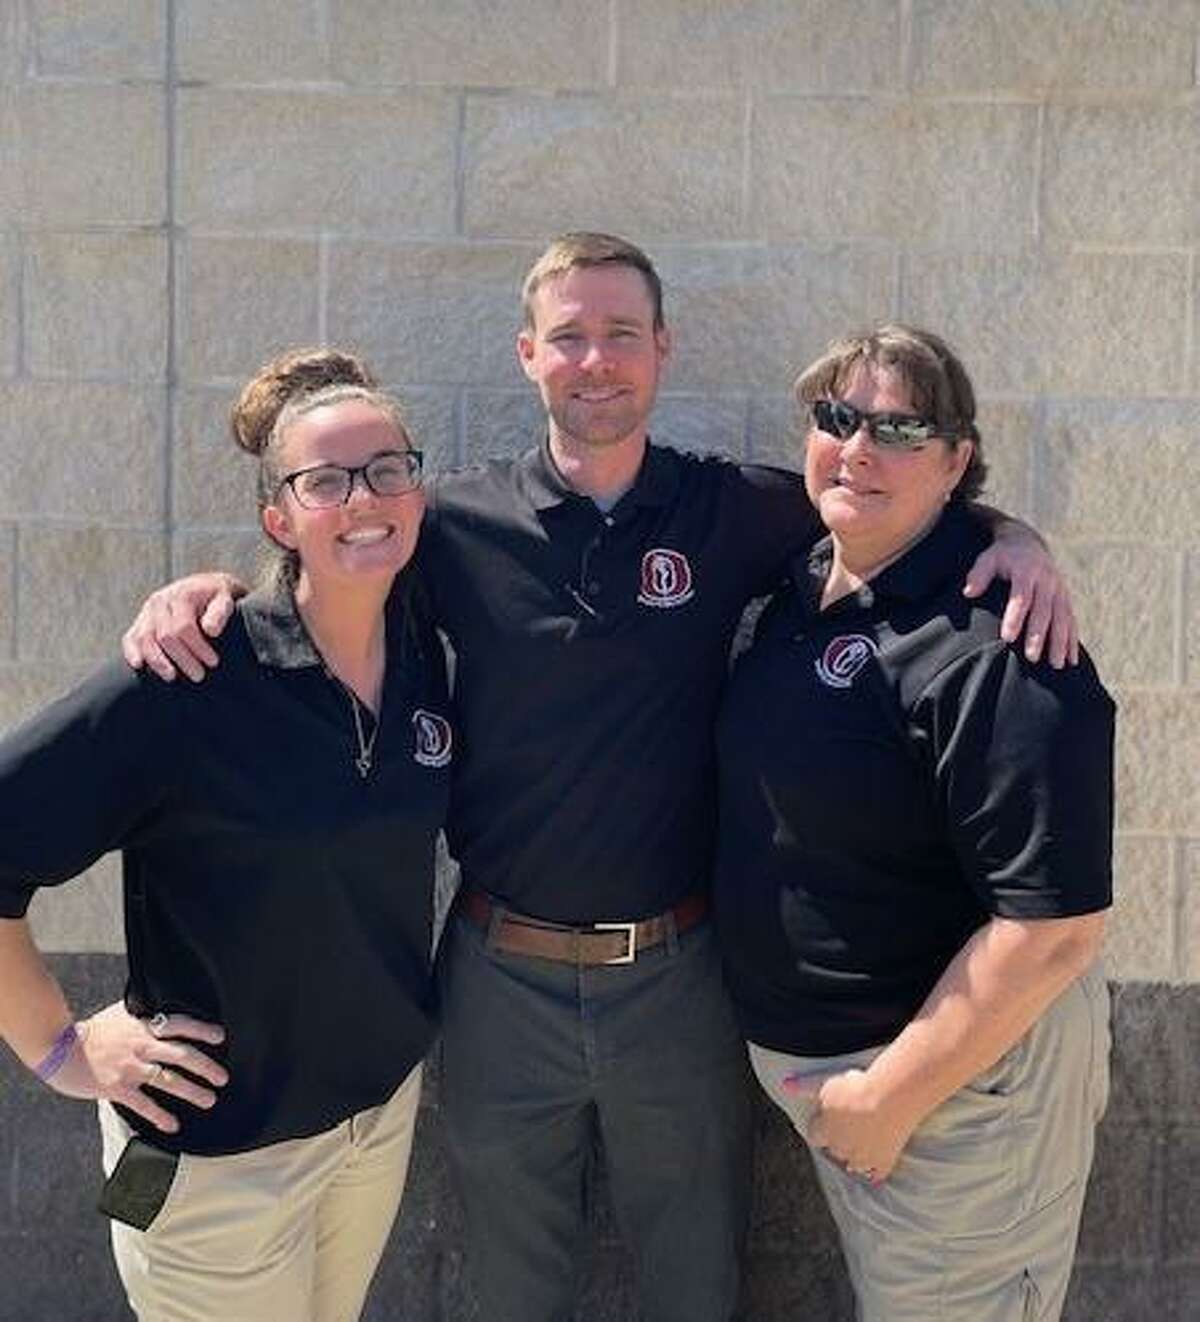 Head athletic trainer Will Ryan, center, and associate athletic trainers Catherine Windsor, left, and Jill Flowers provide care for students at Pearland High School.